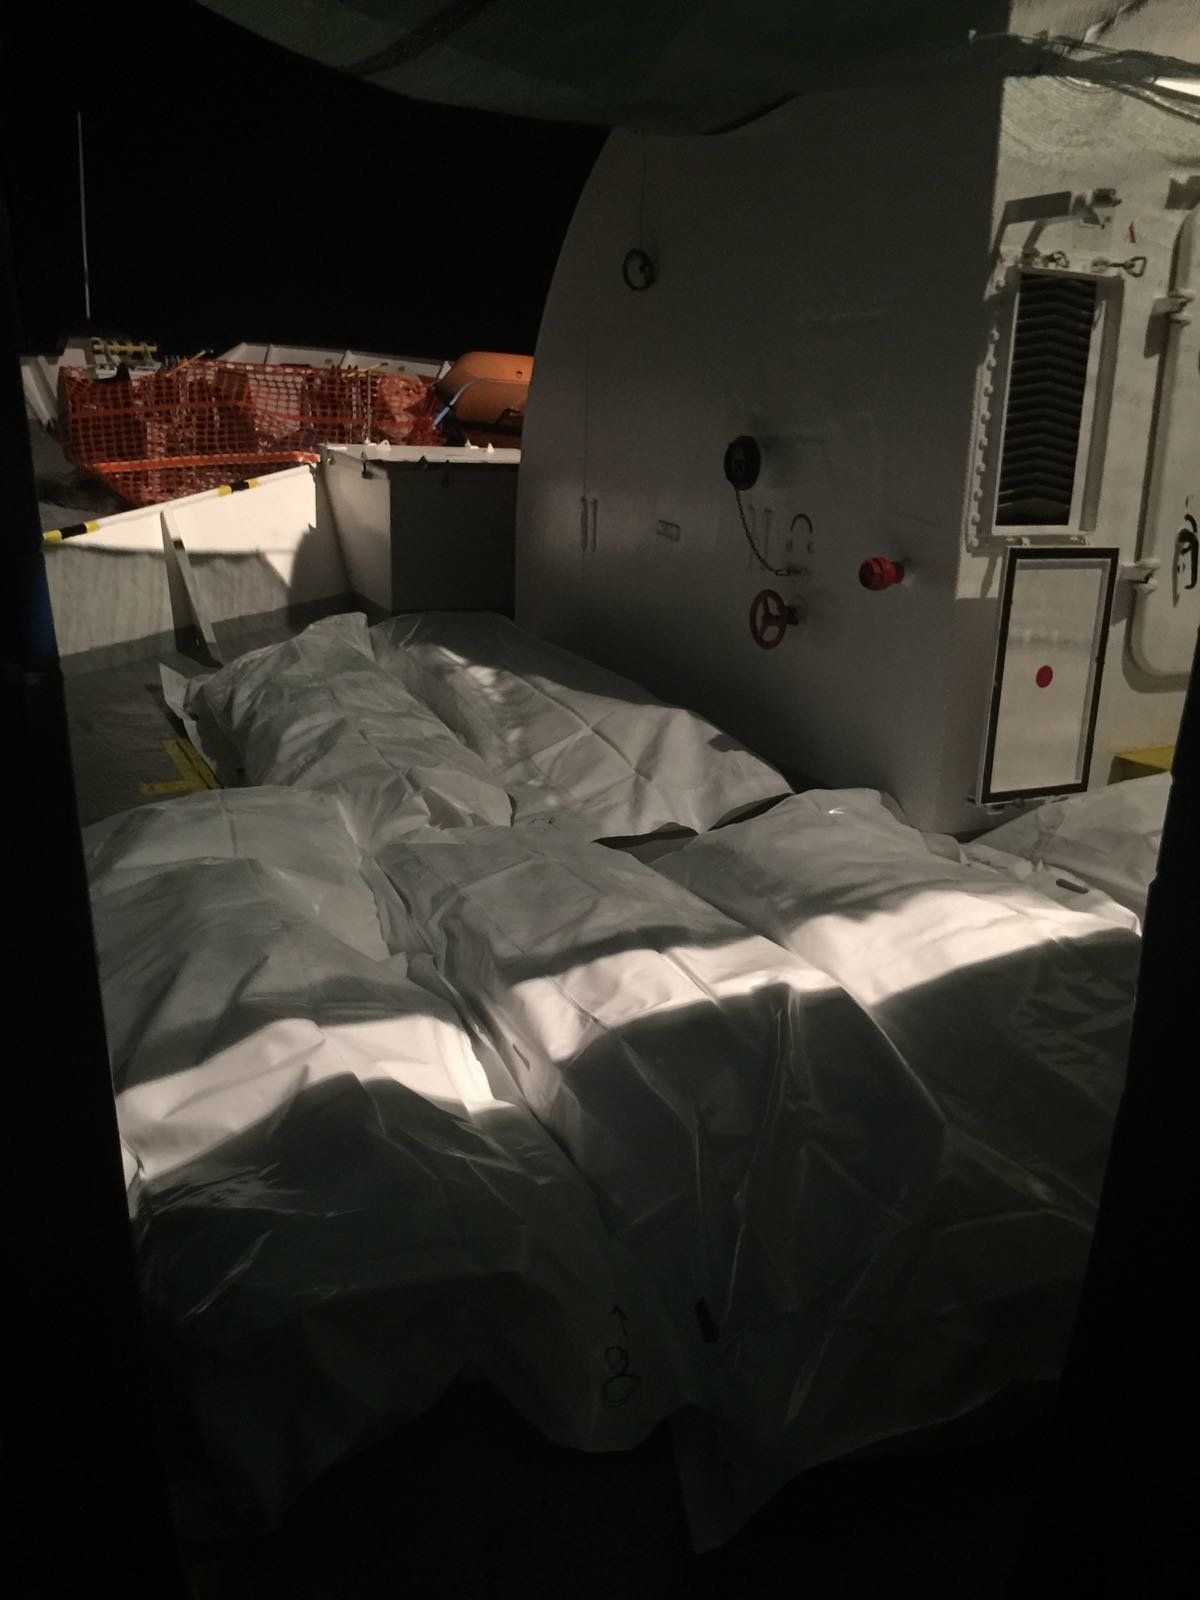 HuffPost UK counted eight recovered bodies onboard the NGO vessel Aquarius, which is being operated by Médecins Sans Frontières and SOS Méditerranée.